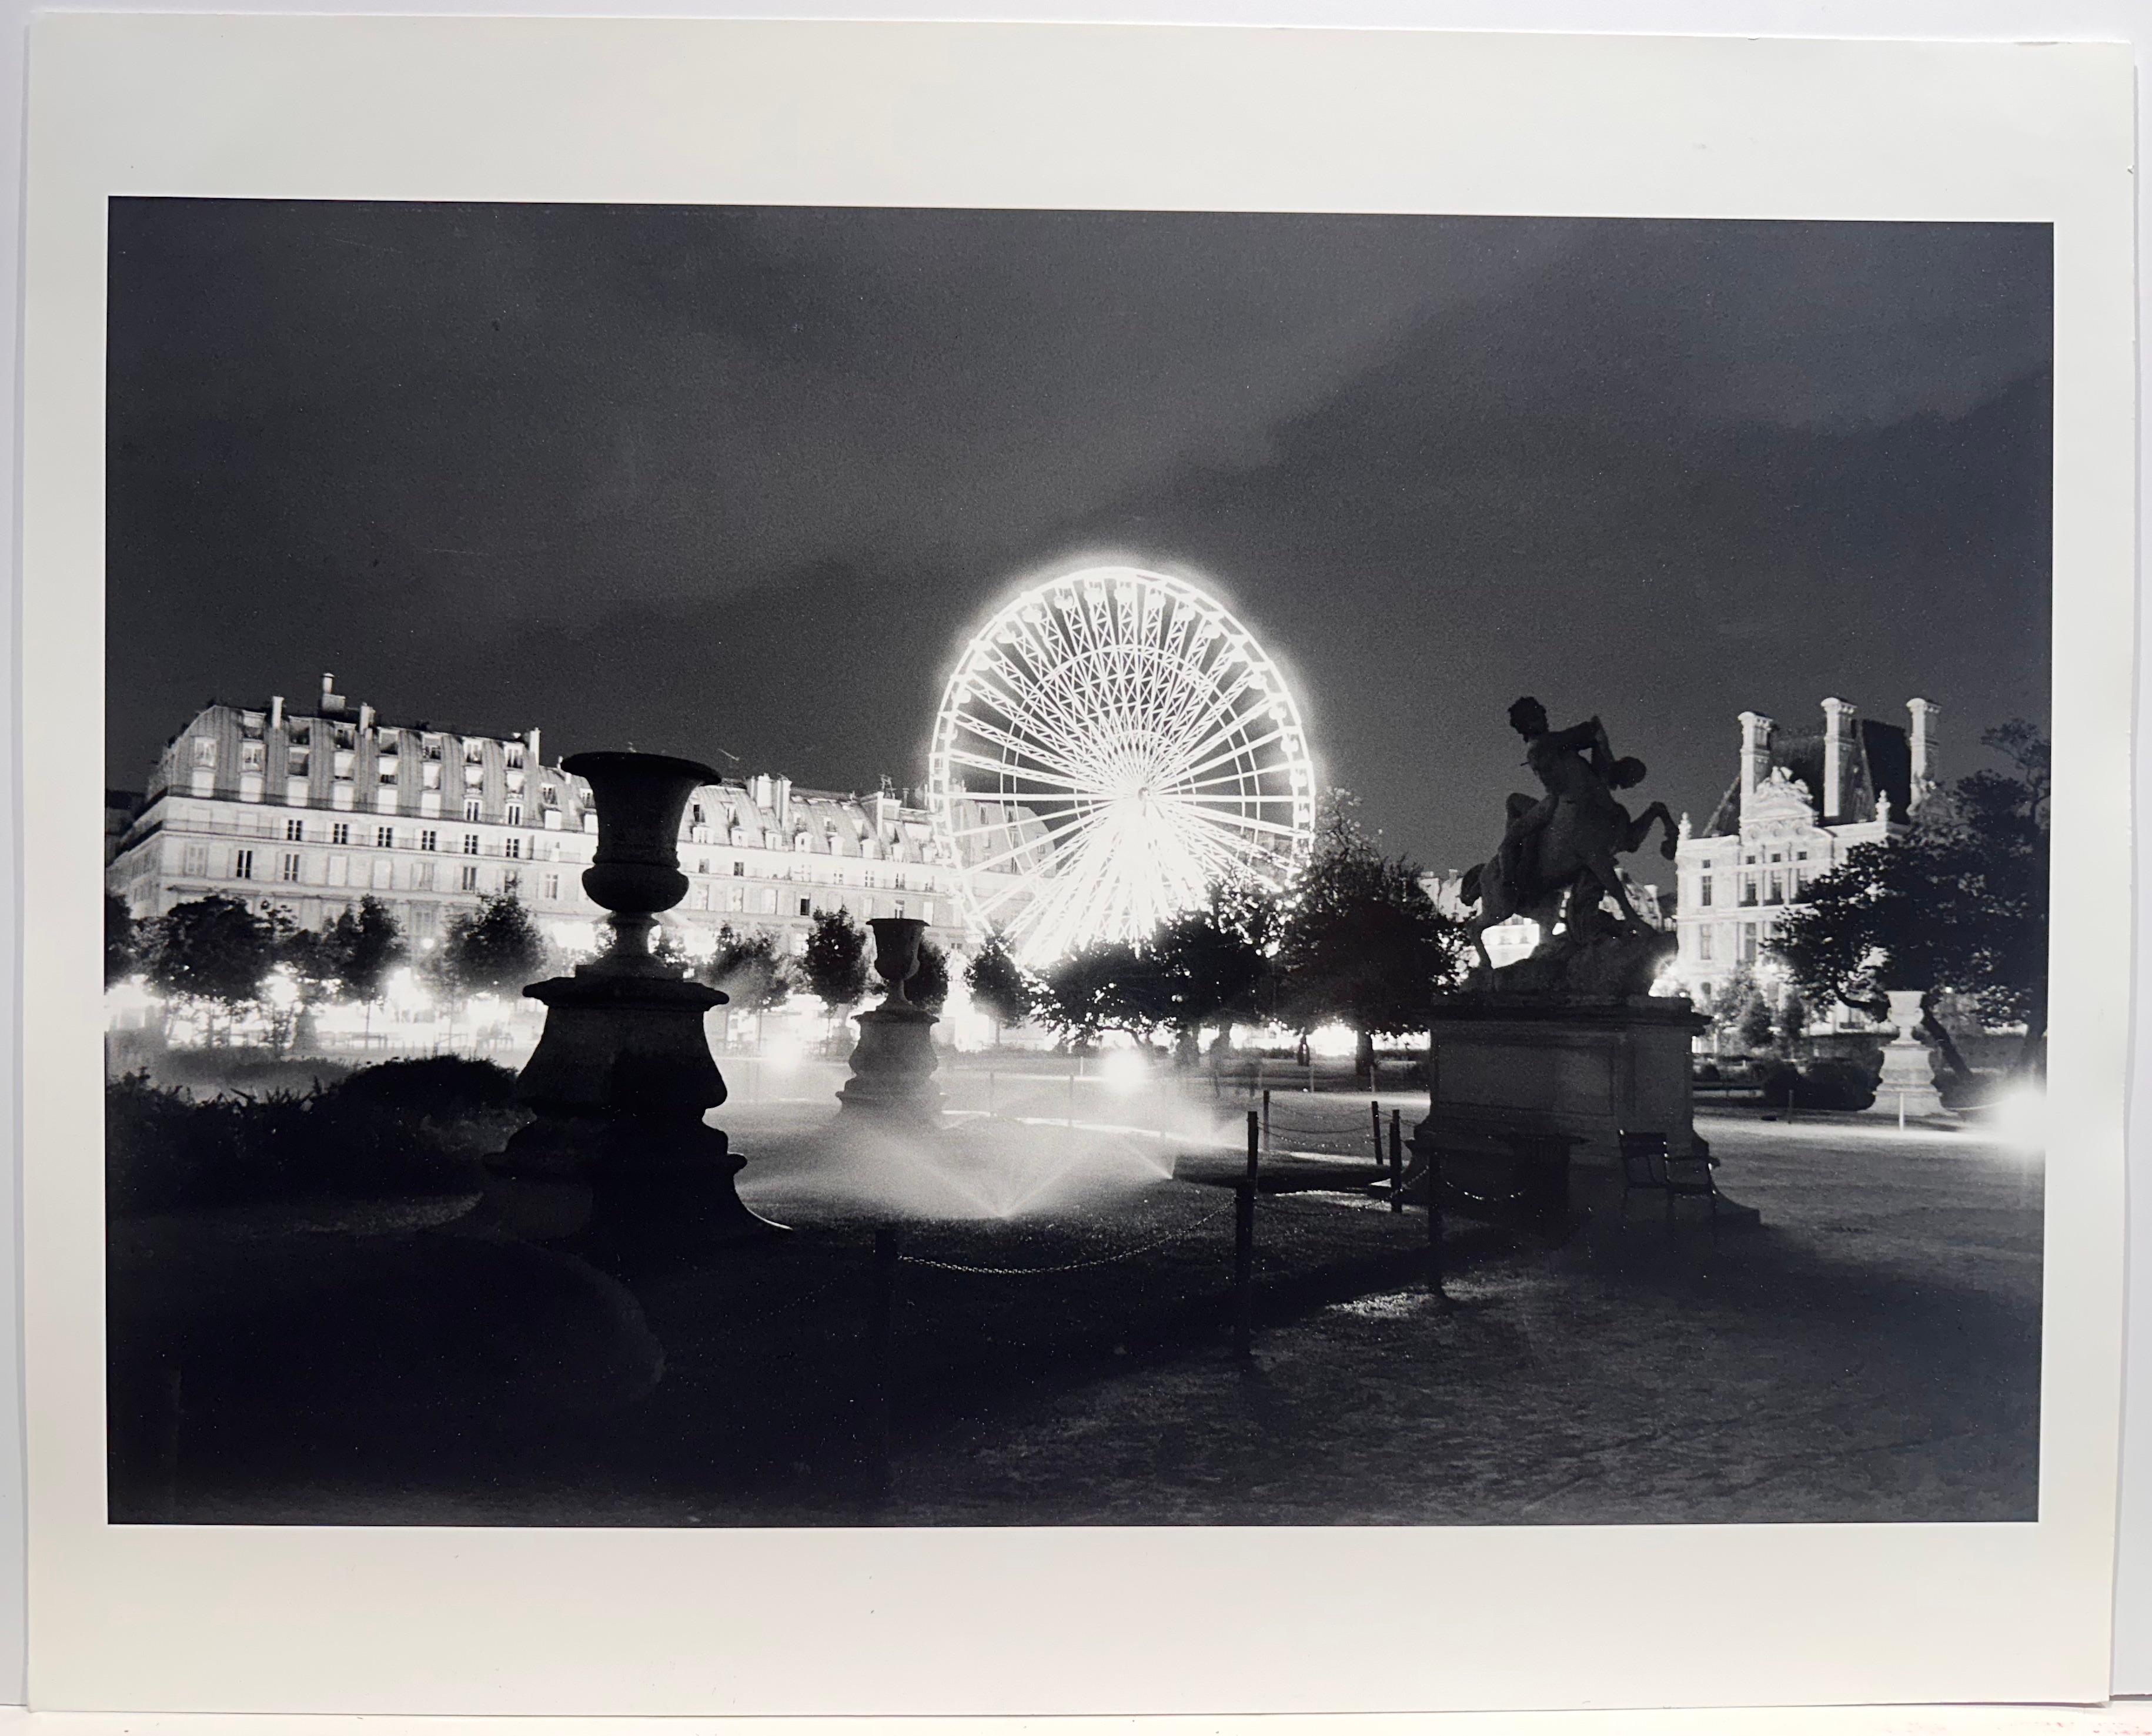 Lynn Saville. Ferris Wheel from the Tuileries, 1999. Photographic print. Edition 5/25. Image measures 12.5 x 18 inches. Sheet is larger. Measures 21.5 x 27 framed. Signed, titled and dated on reverse. 